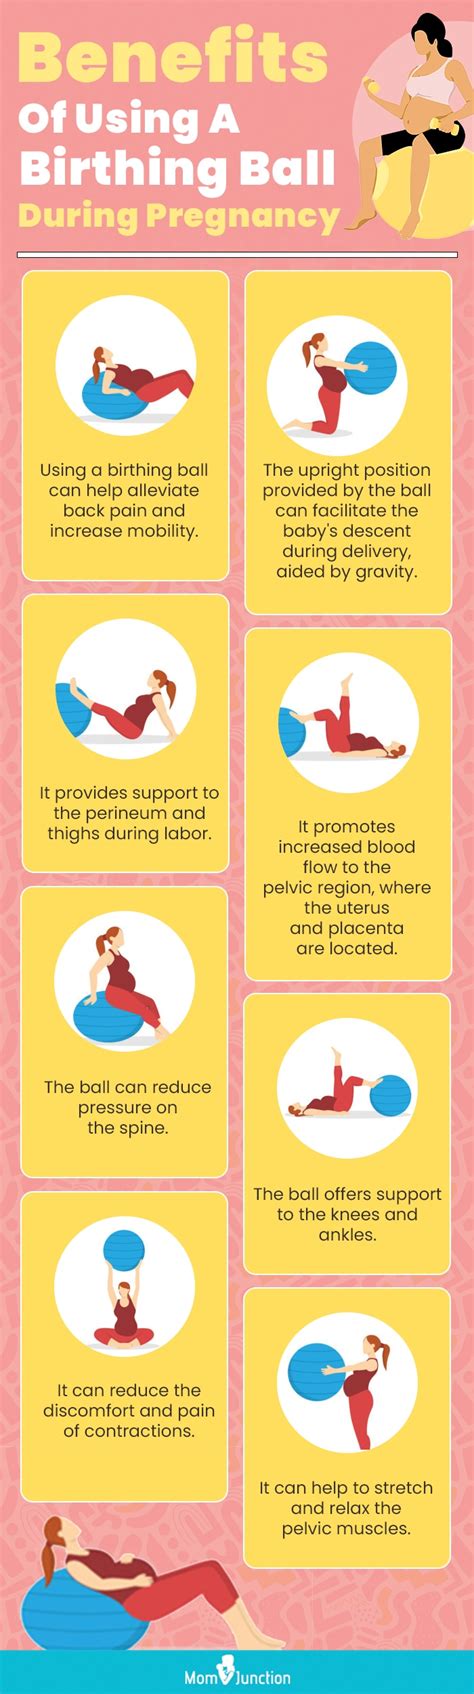 10 Benefits Of Birthing Ball Exercises During Pregnancy